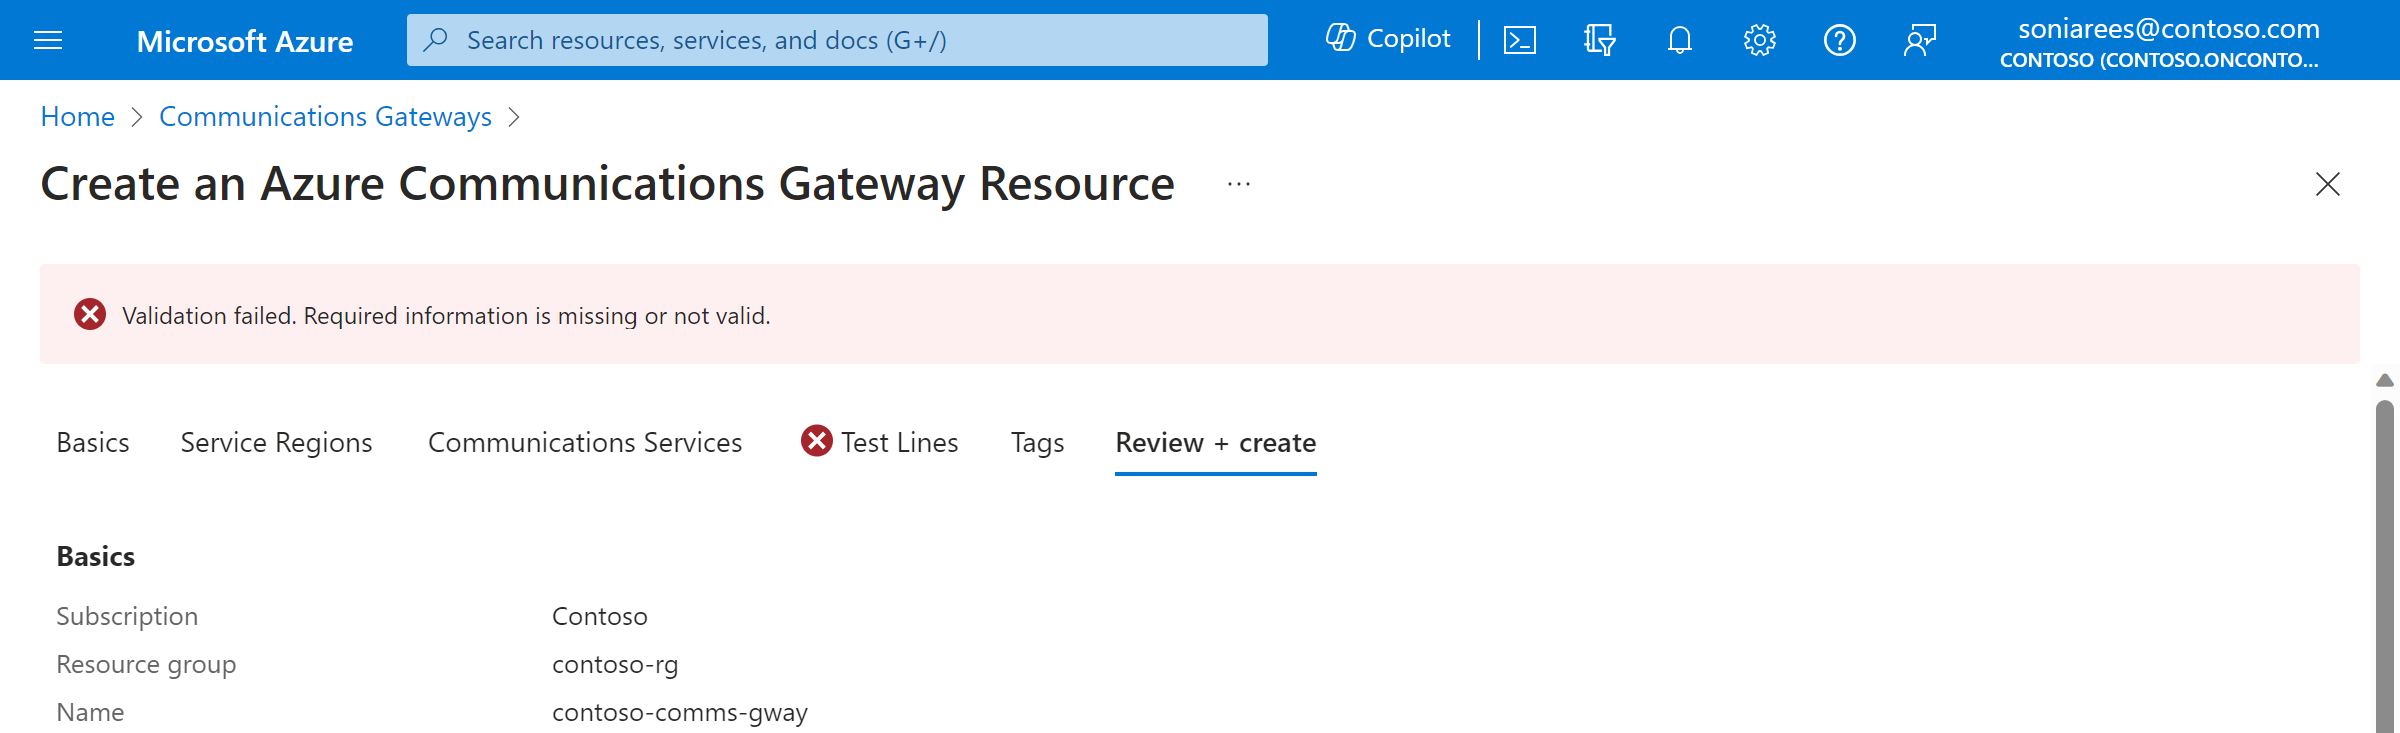 Screenshot of the Create an Azure Communications Gateway portal, showing a validation that failed due to missing information in the Contacts section.